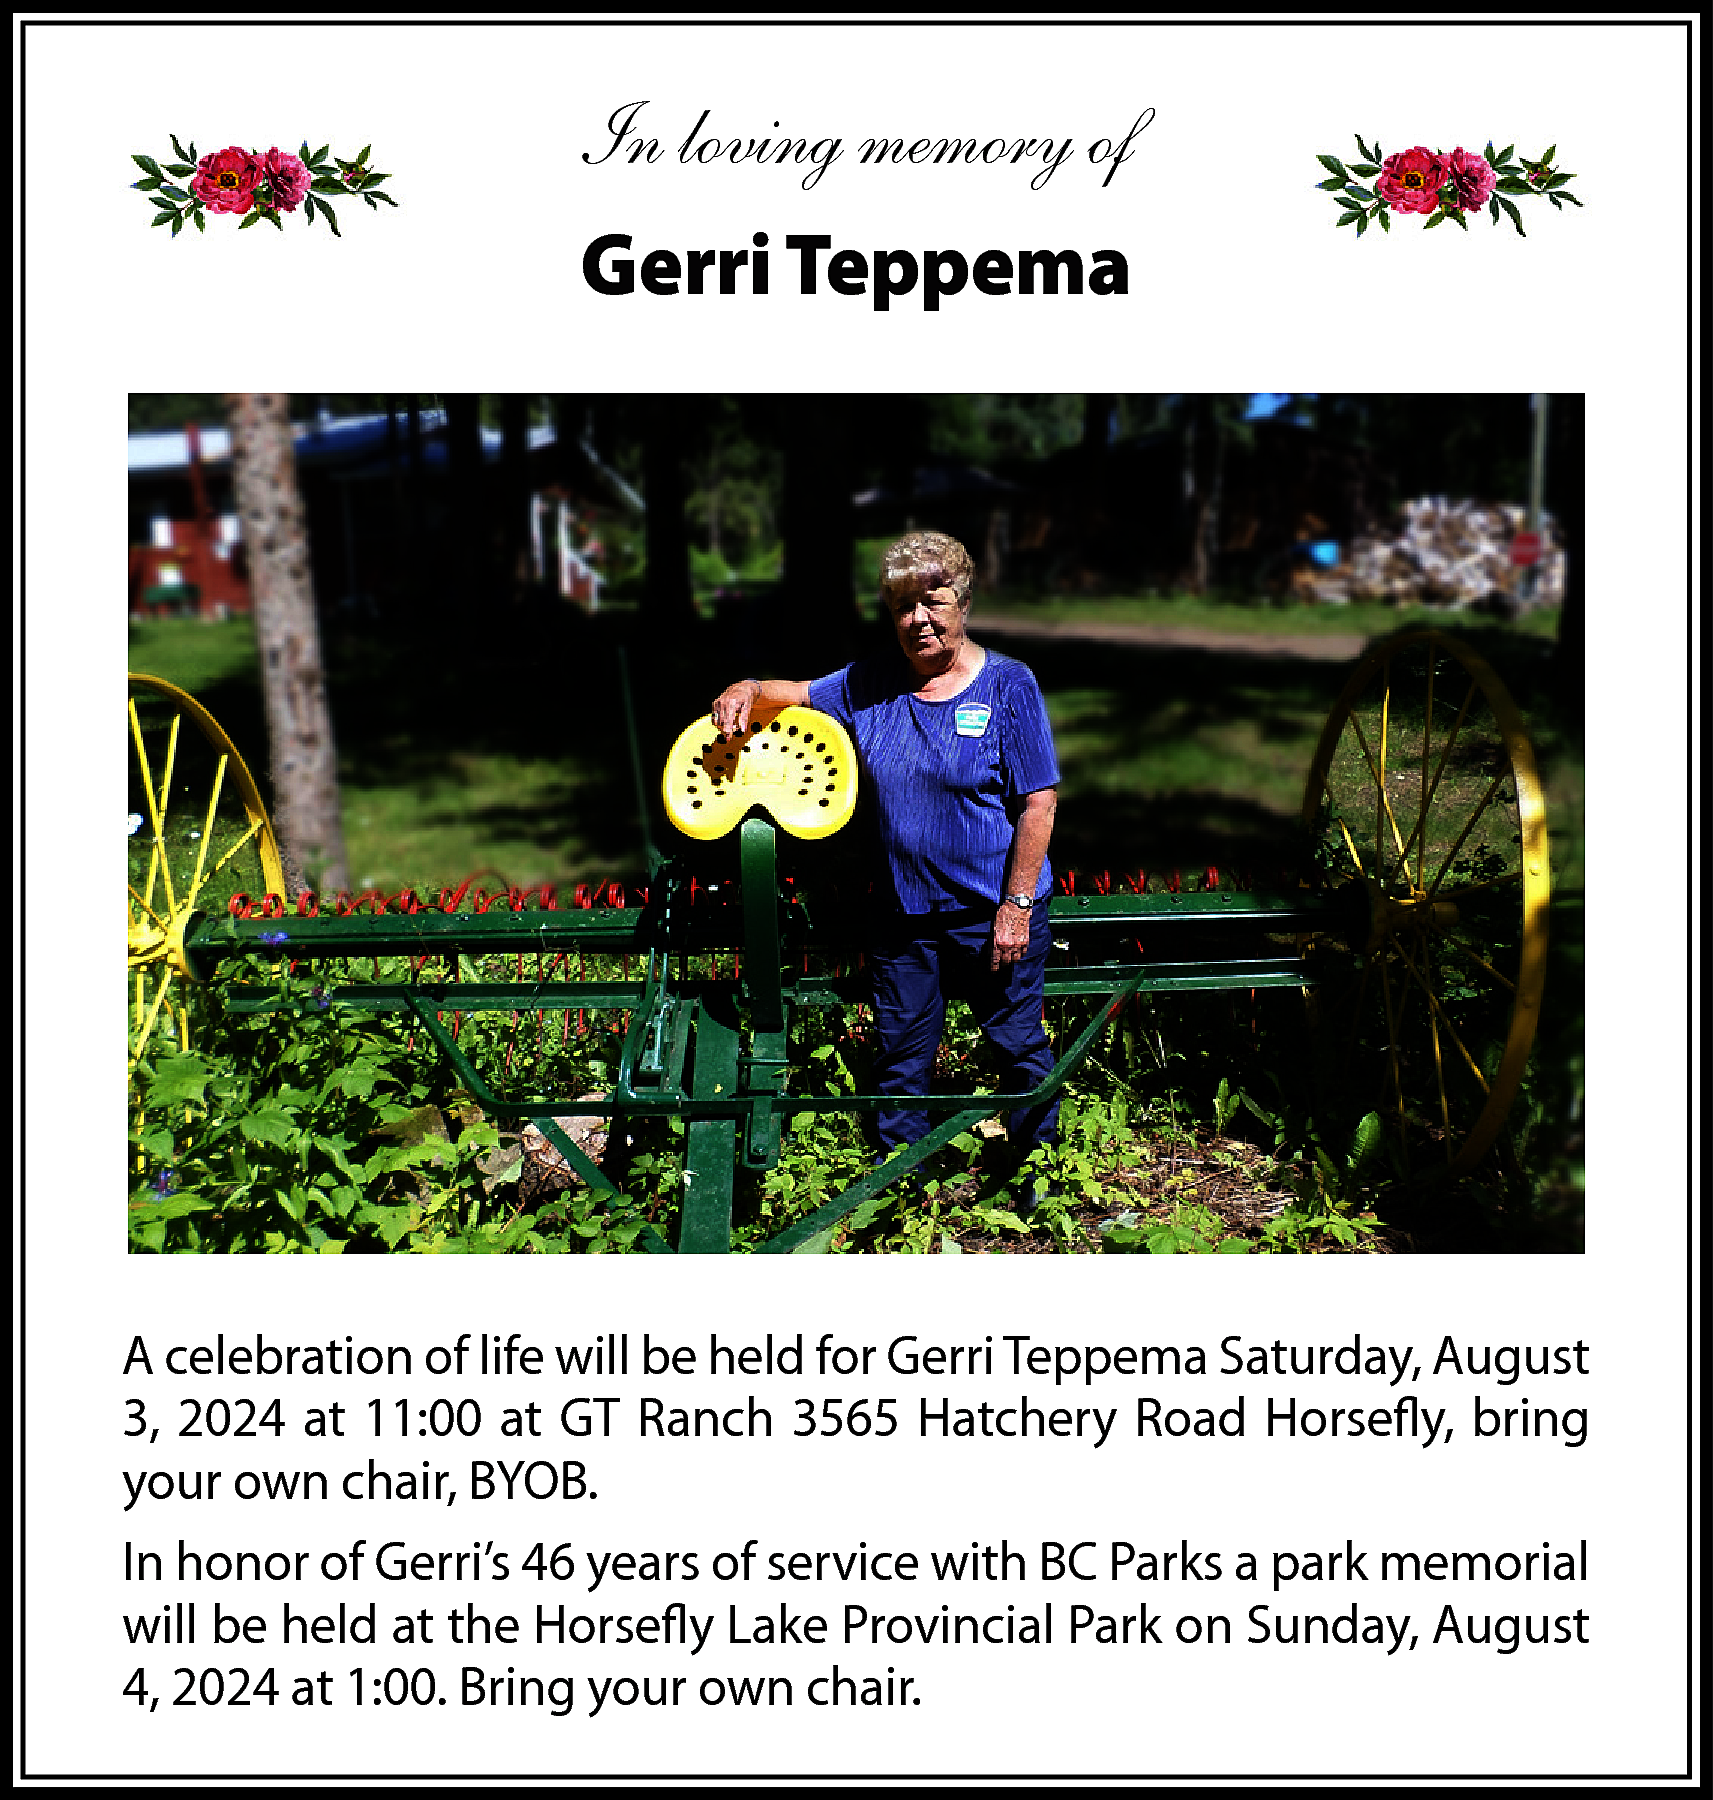 In loving memory of <br>Gerri  In loving memory of  Gerri Teppema    A celebration of life will be held for Gerri Teppema Saturday, August  3, 2024 at 11:00 at GT Ranch 3565 Hatchery Road Horsefly, bring  your own chair, BYOB.  In honor of Gerri’s 46 years of service with BC Parks a park memorial  will be held at the Horsefly Lake Provincial Park on Sunday, August  4, 2024 at 1:00. Bring your own chair.    